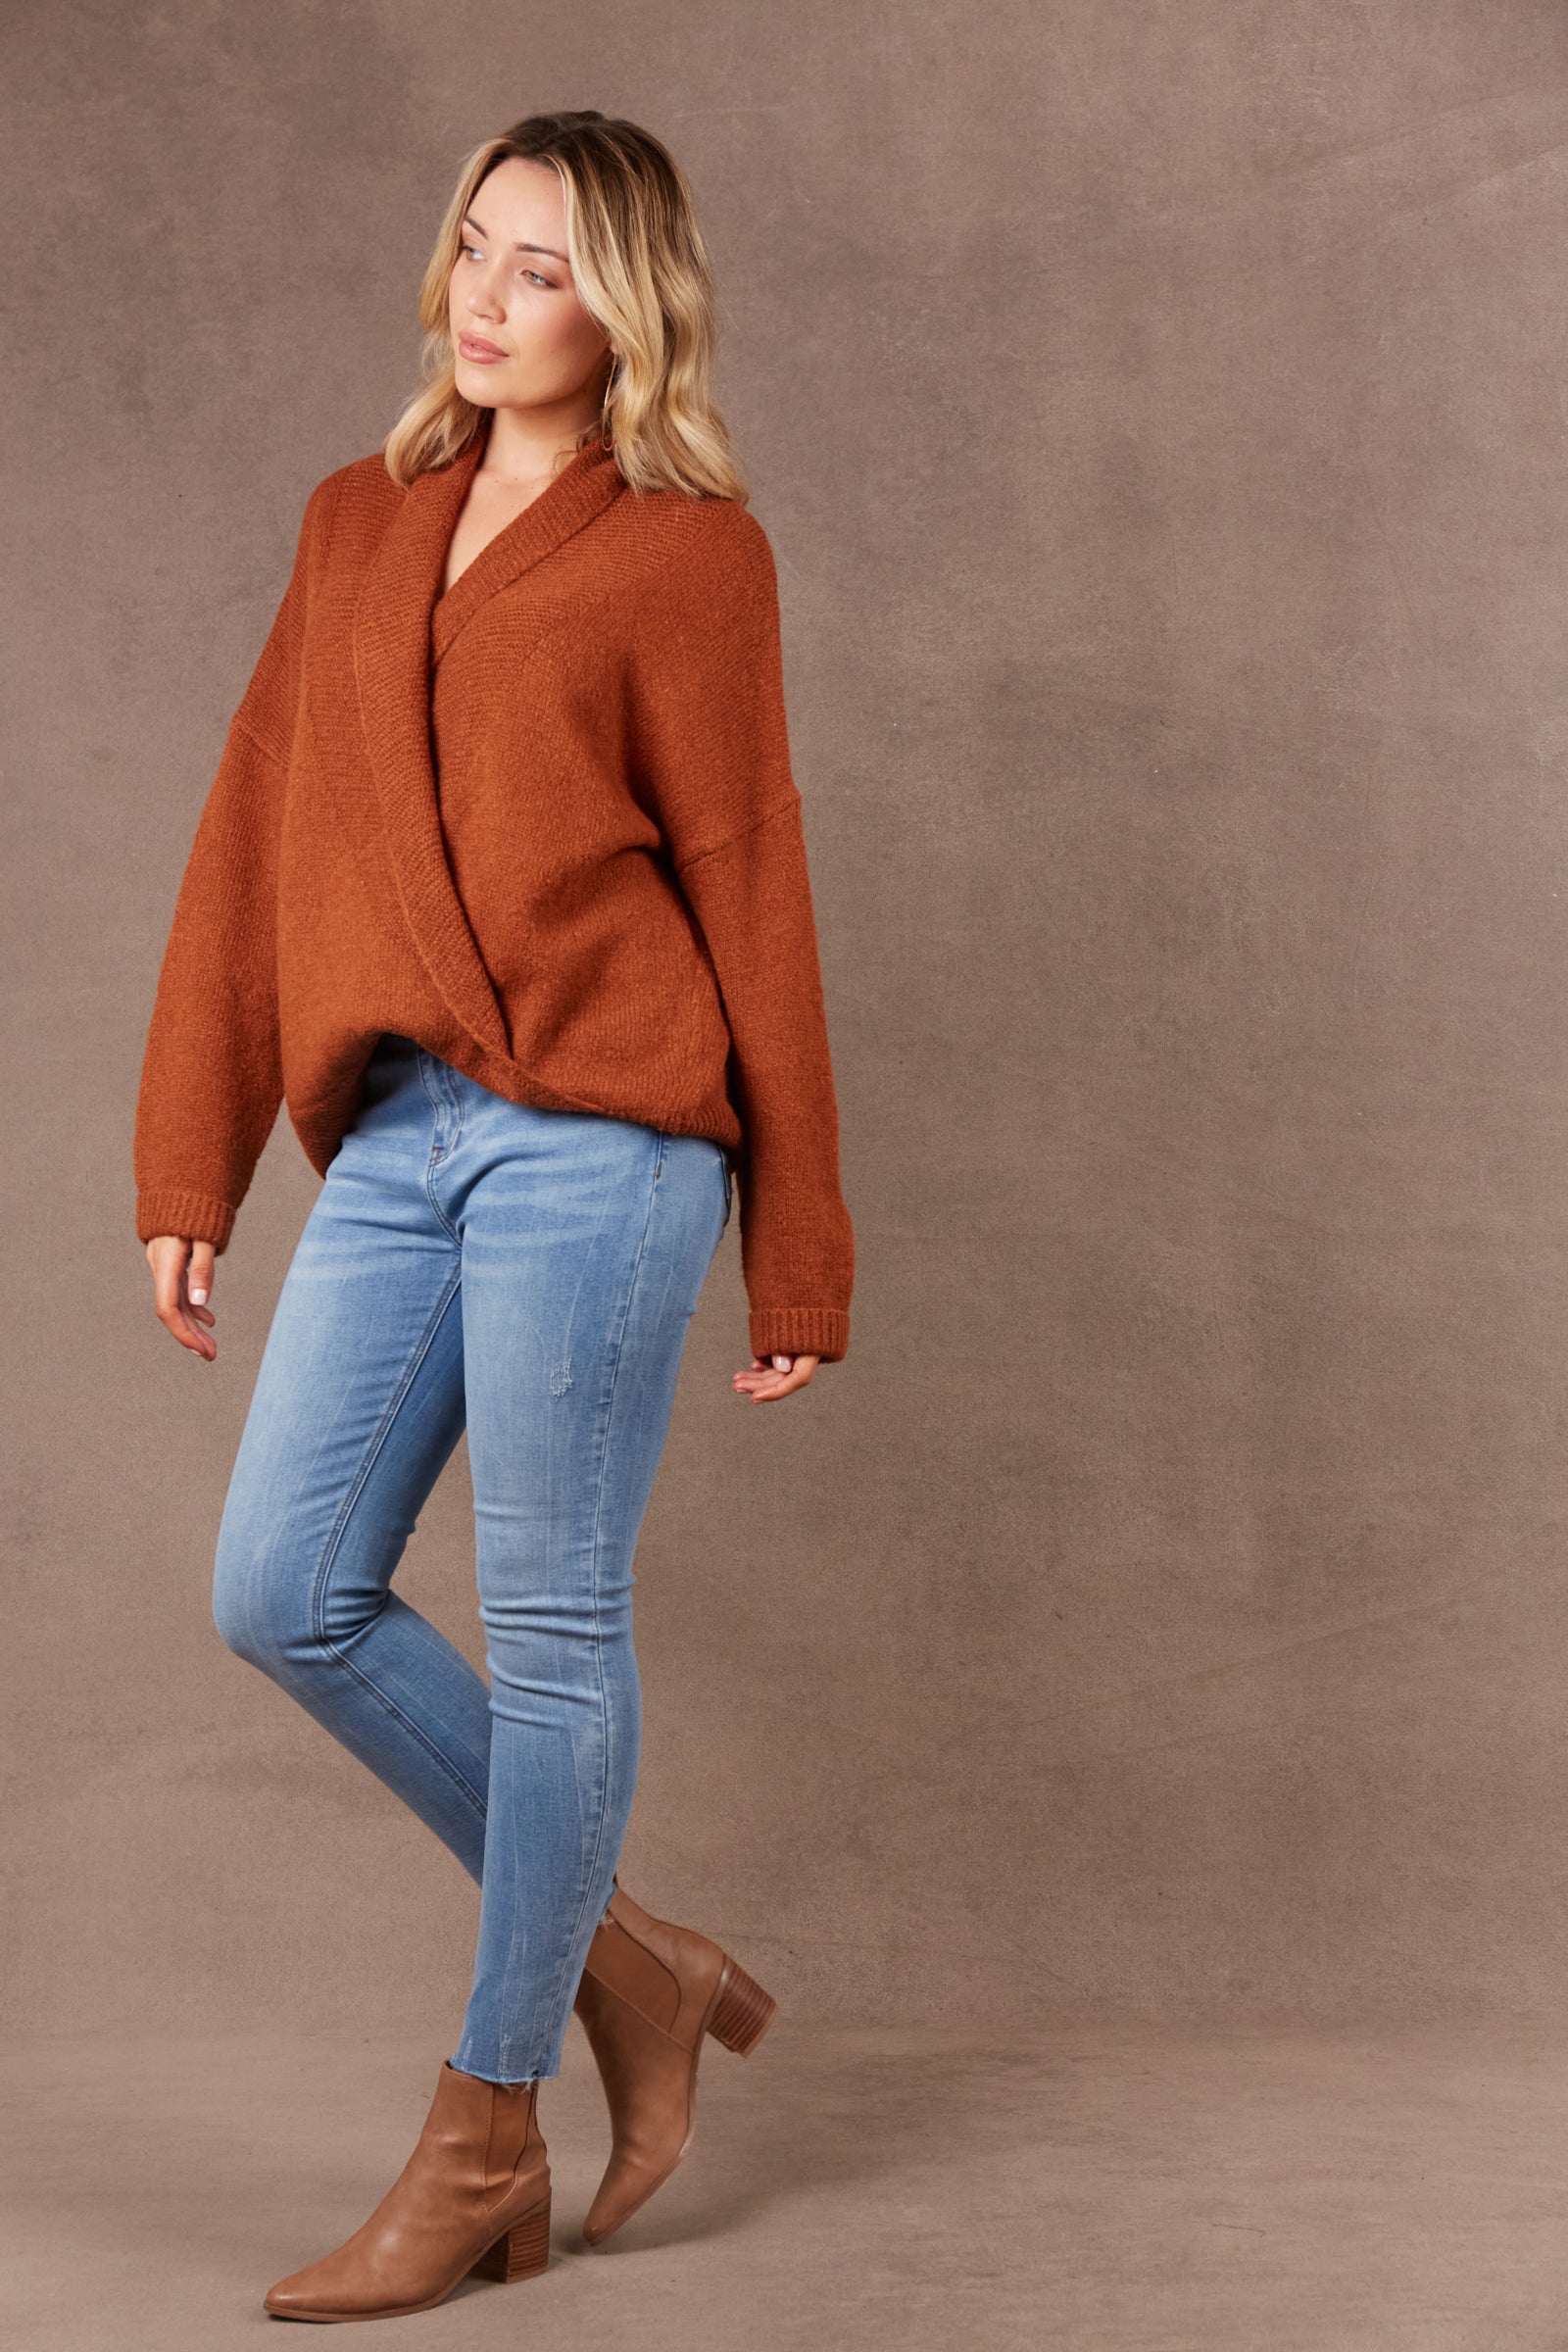 Paarl Crossover Knit - Ochre-Knitwear & Jumpers-Eb & Ive-The Bay Room